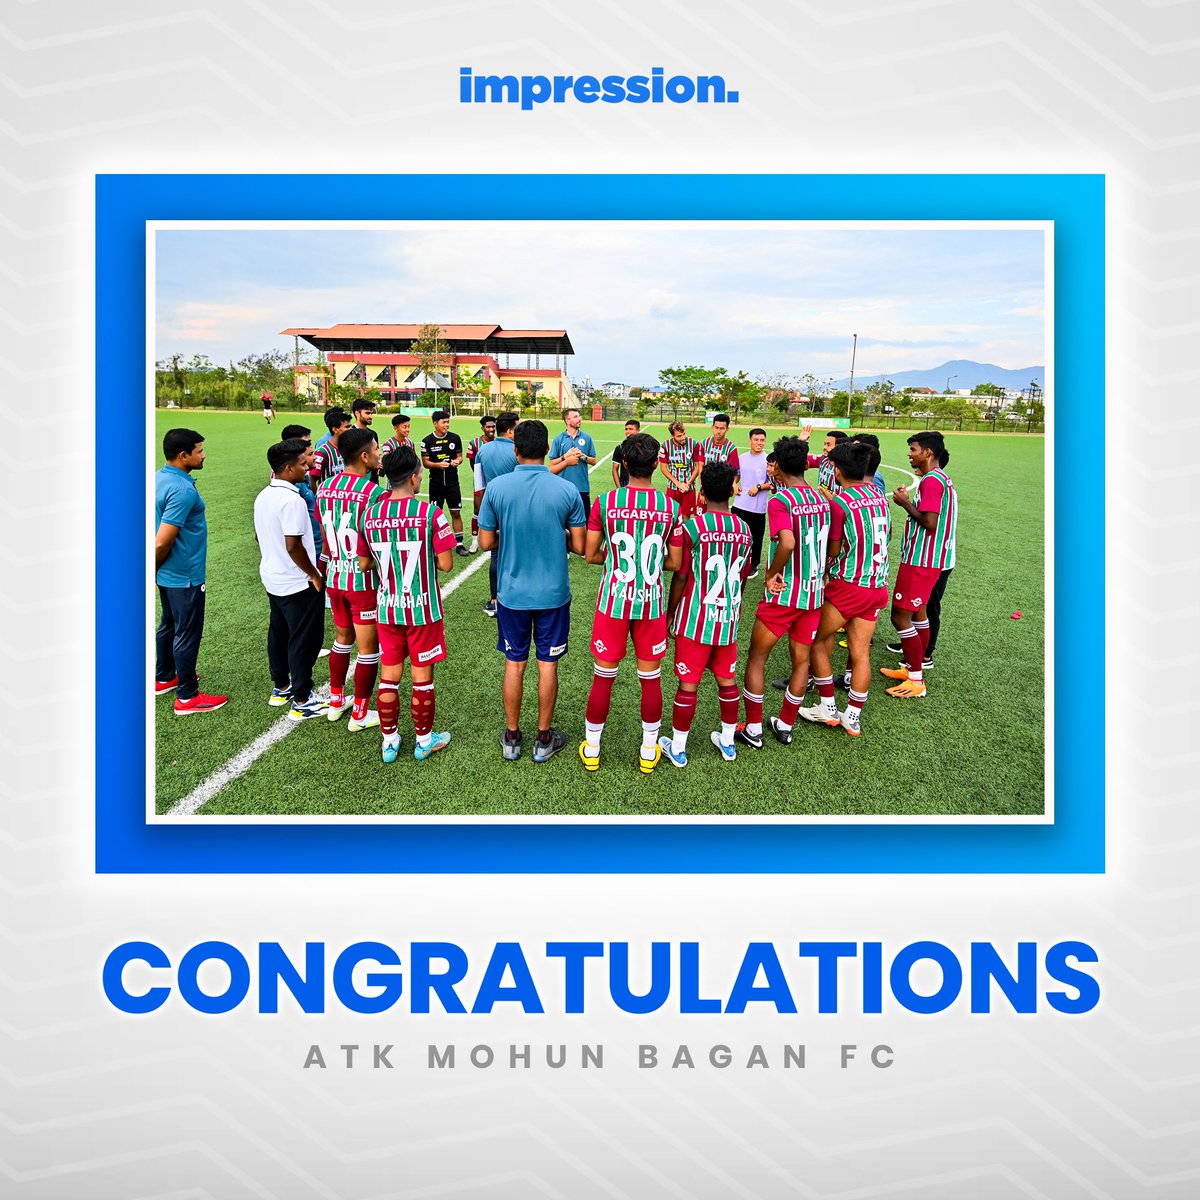 🎉Congratulations to our athletes and everyone involved with #ATKMohunBagan as they qualify for the #RFDL semis and the #NextGen tournament. 

👏Well done lads Md Fardin, Akash Mondal, Kaushik Das, Swarnadip Das, Deep Biswas, Shiba Mandi, and Rahul Kumar

#TeamImpression